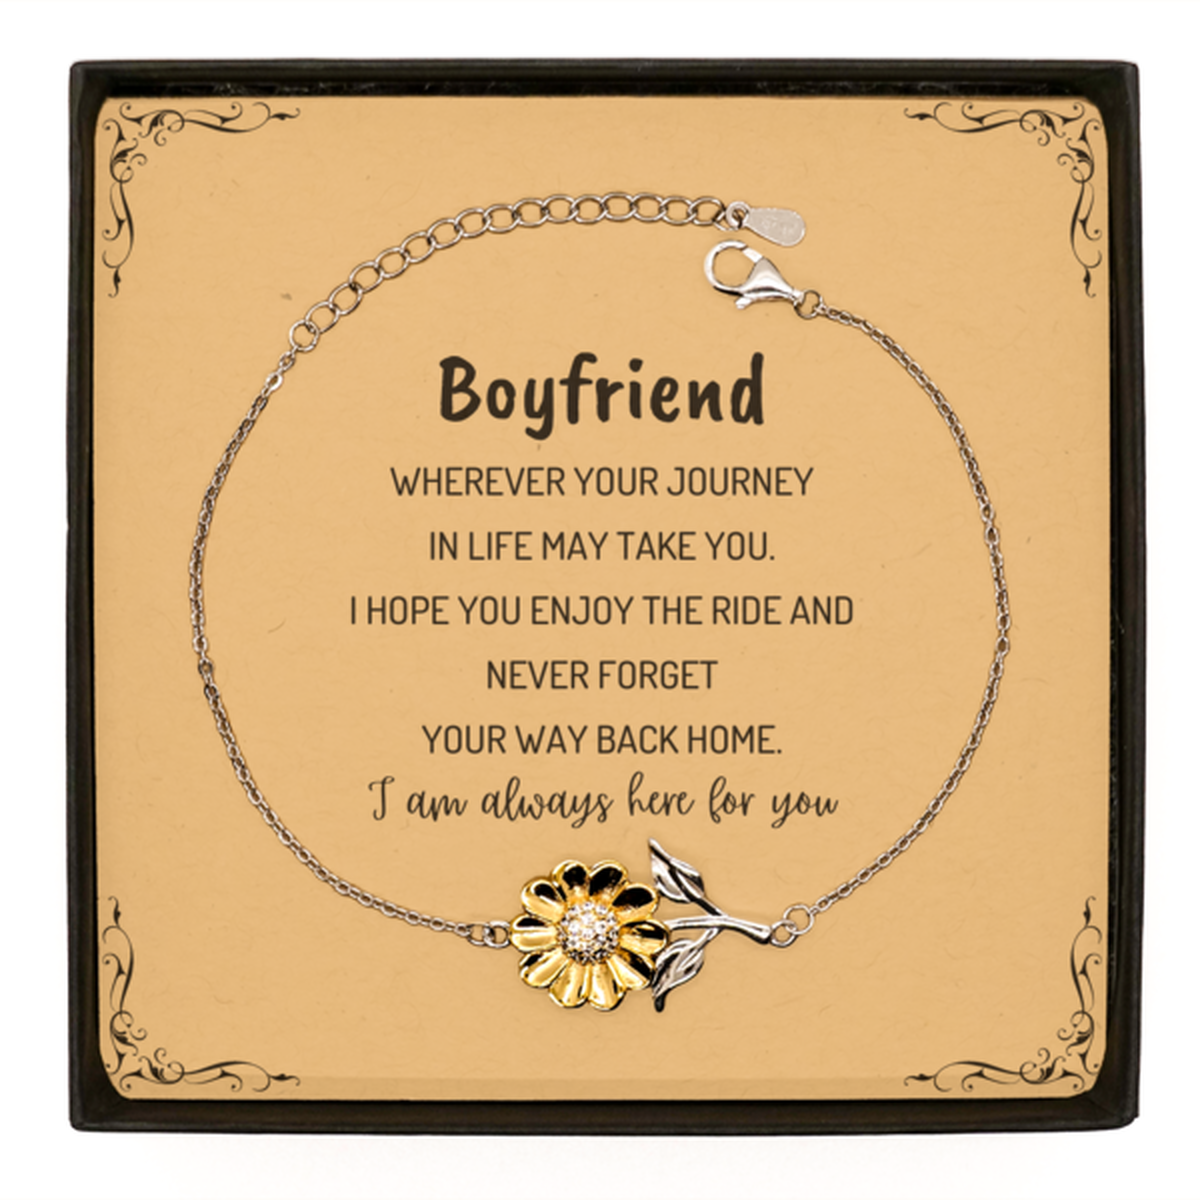 Boyfriend wherever your journey in life may take you, I am always here for you Boyfriend Sunflower Bracelet, Awesome Christmas Gifts For Boyfriend Message Card, Boyfriend Birthday Gifts for Men Women Family Loved One